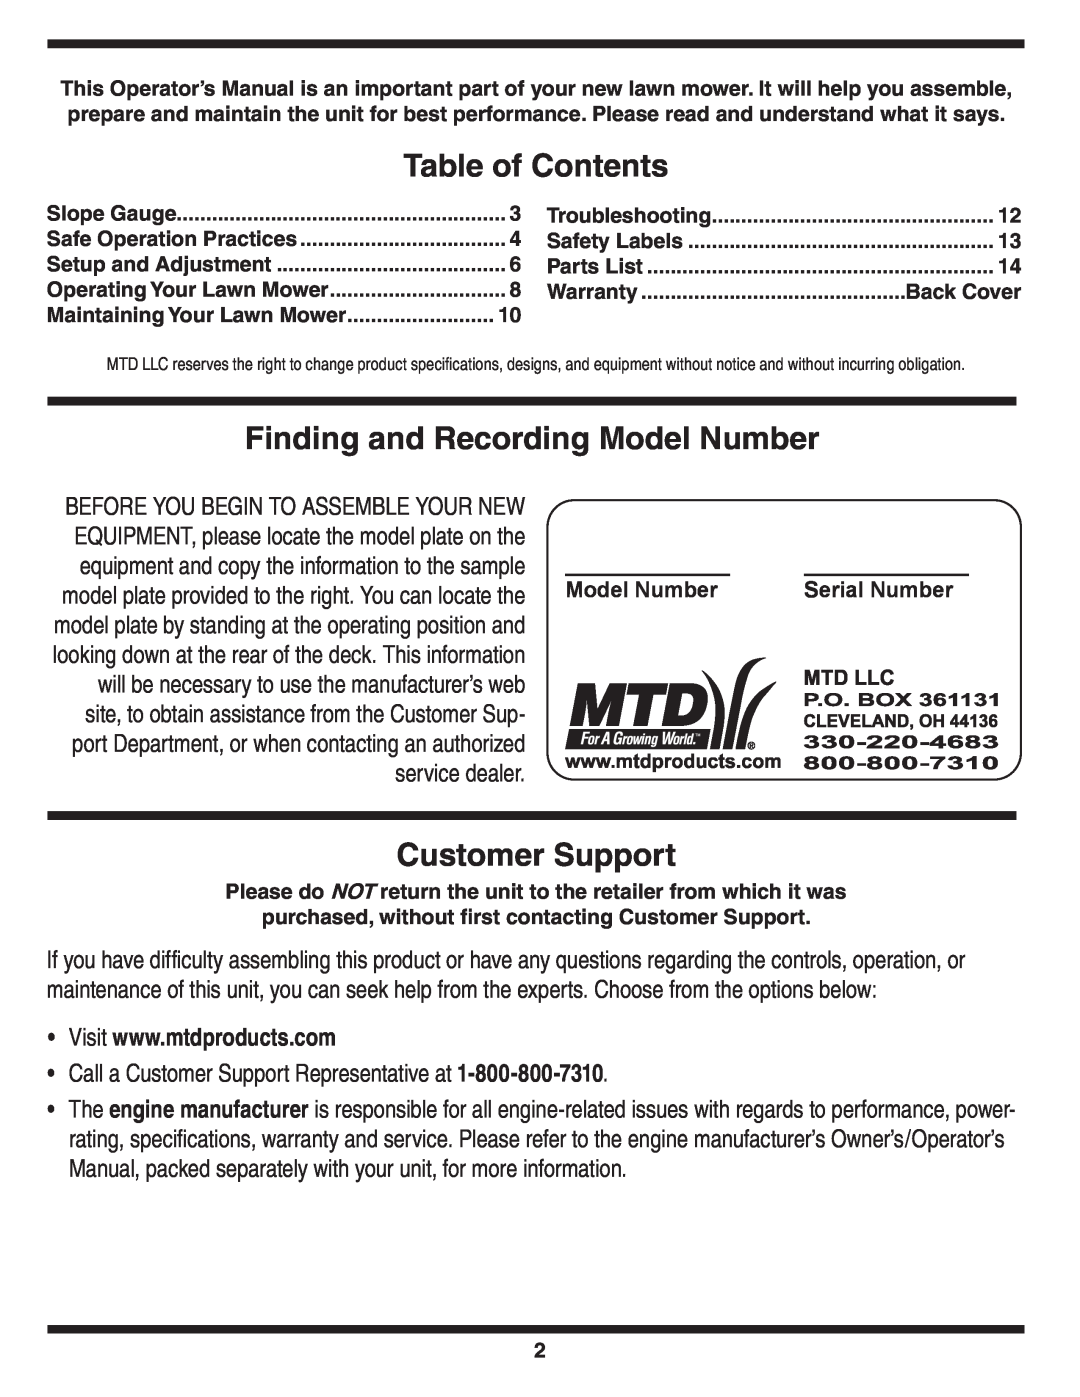 MTD Series 410 thru 420 warranty Table of Contents, Finding and Recording Model Number, Customer Support, service dealer 